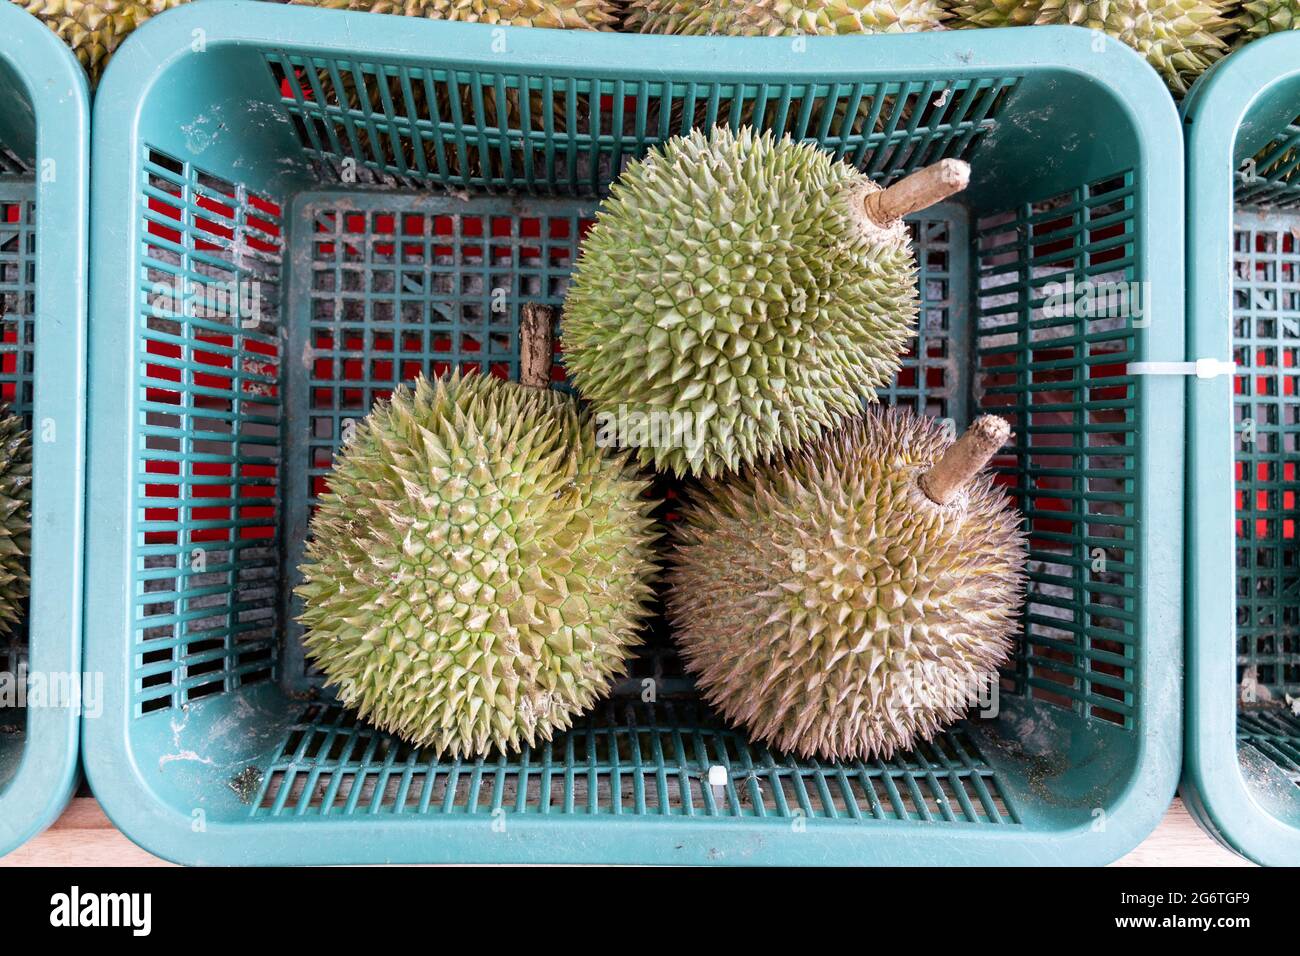 Three delicious Malaysian durian fruit displayed in basket for sale Stock Photo